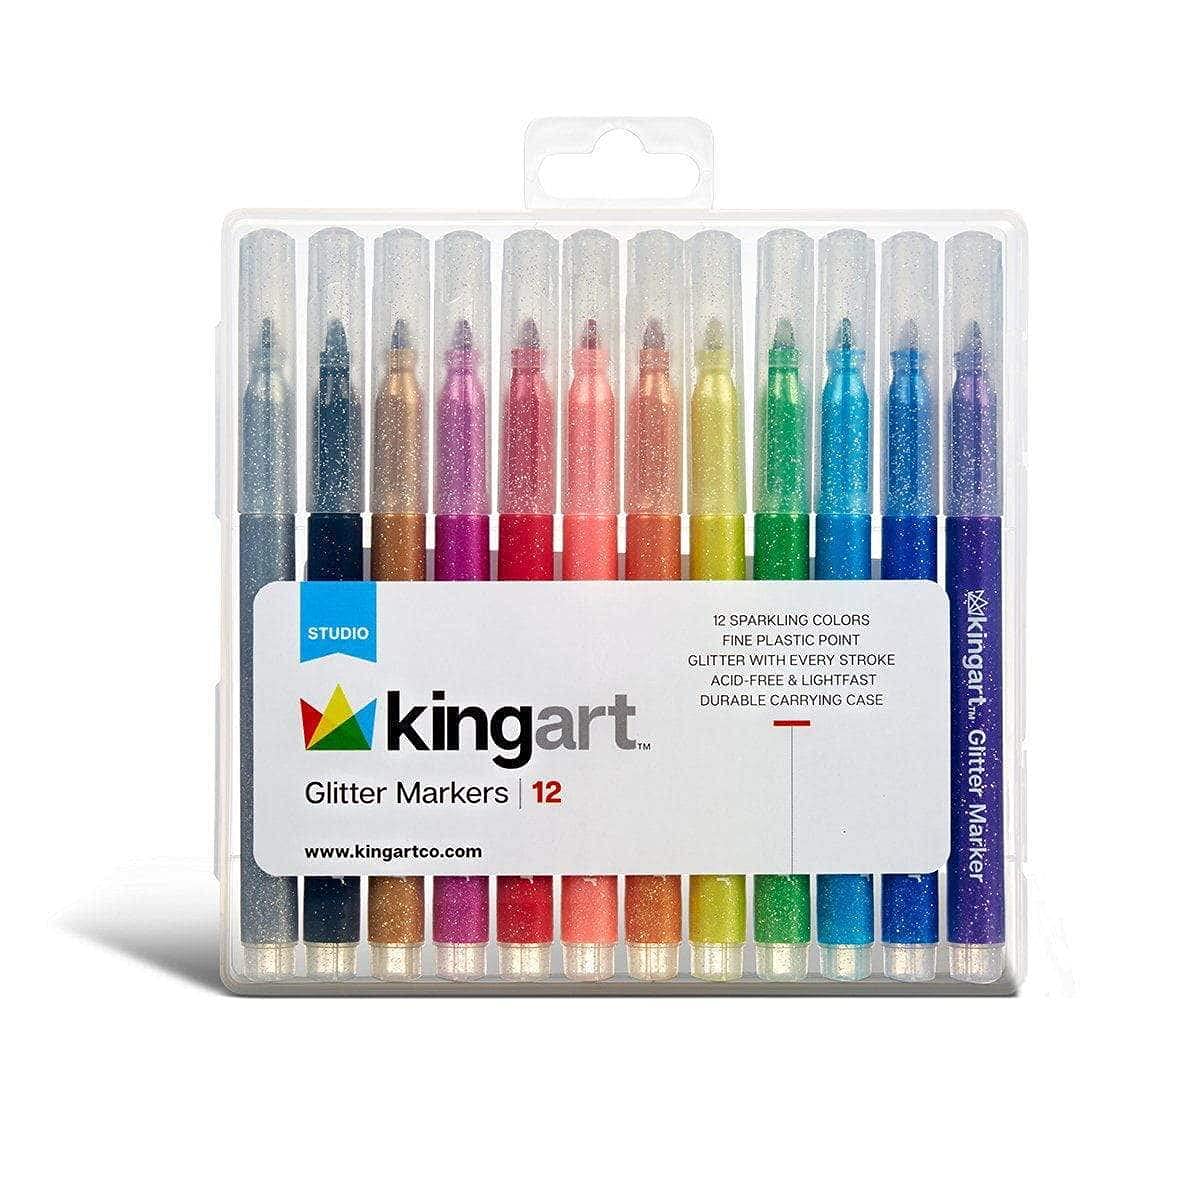  KINGART PRO Coloring Brush Pen Watercolor Markers, in 48 Vivid  Colors with Blendable Ink for Fine, Medium, or Bold Brush Strokes